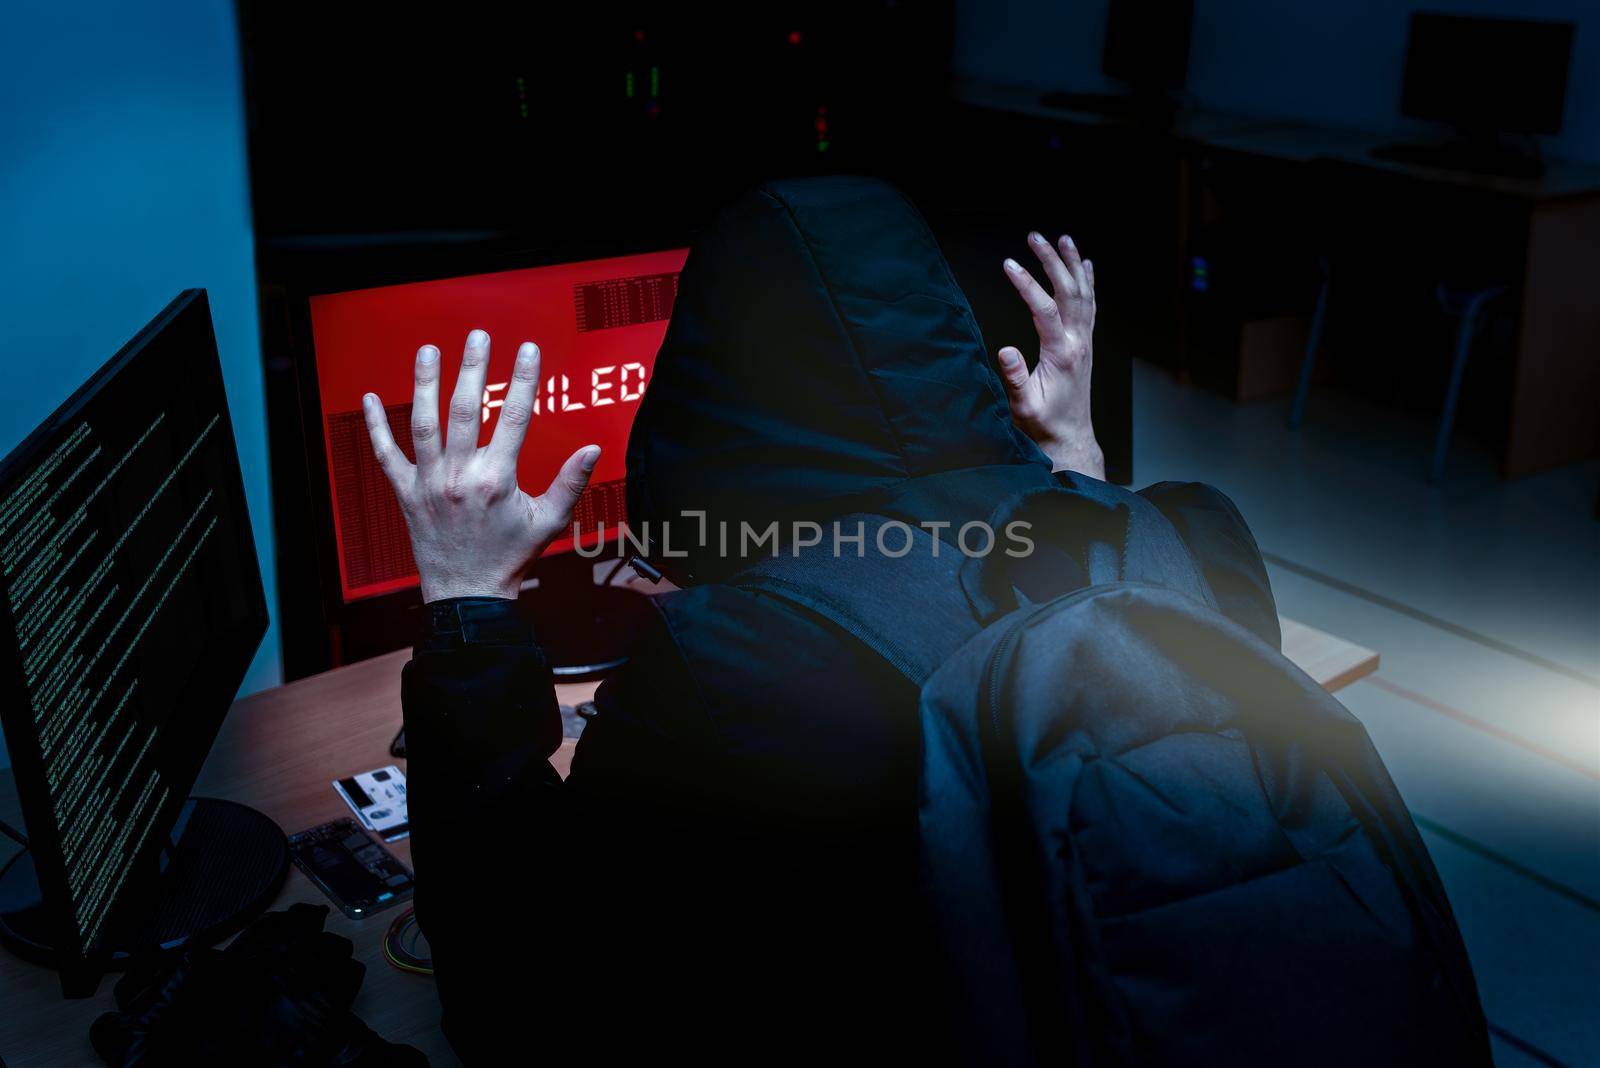 Internet criminal hacker trying to hack into corporate servers arrested by police at night. Portrait of a surrendered computer hacker who raised his hands under a flashlight. failed hack by Nickstock